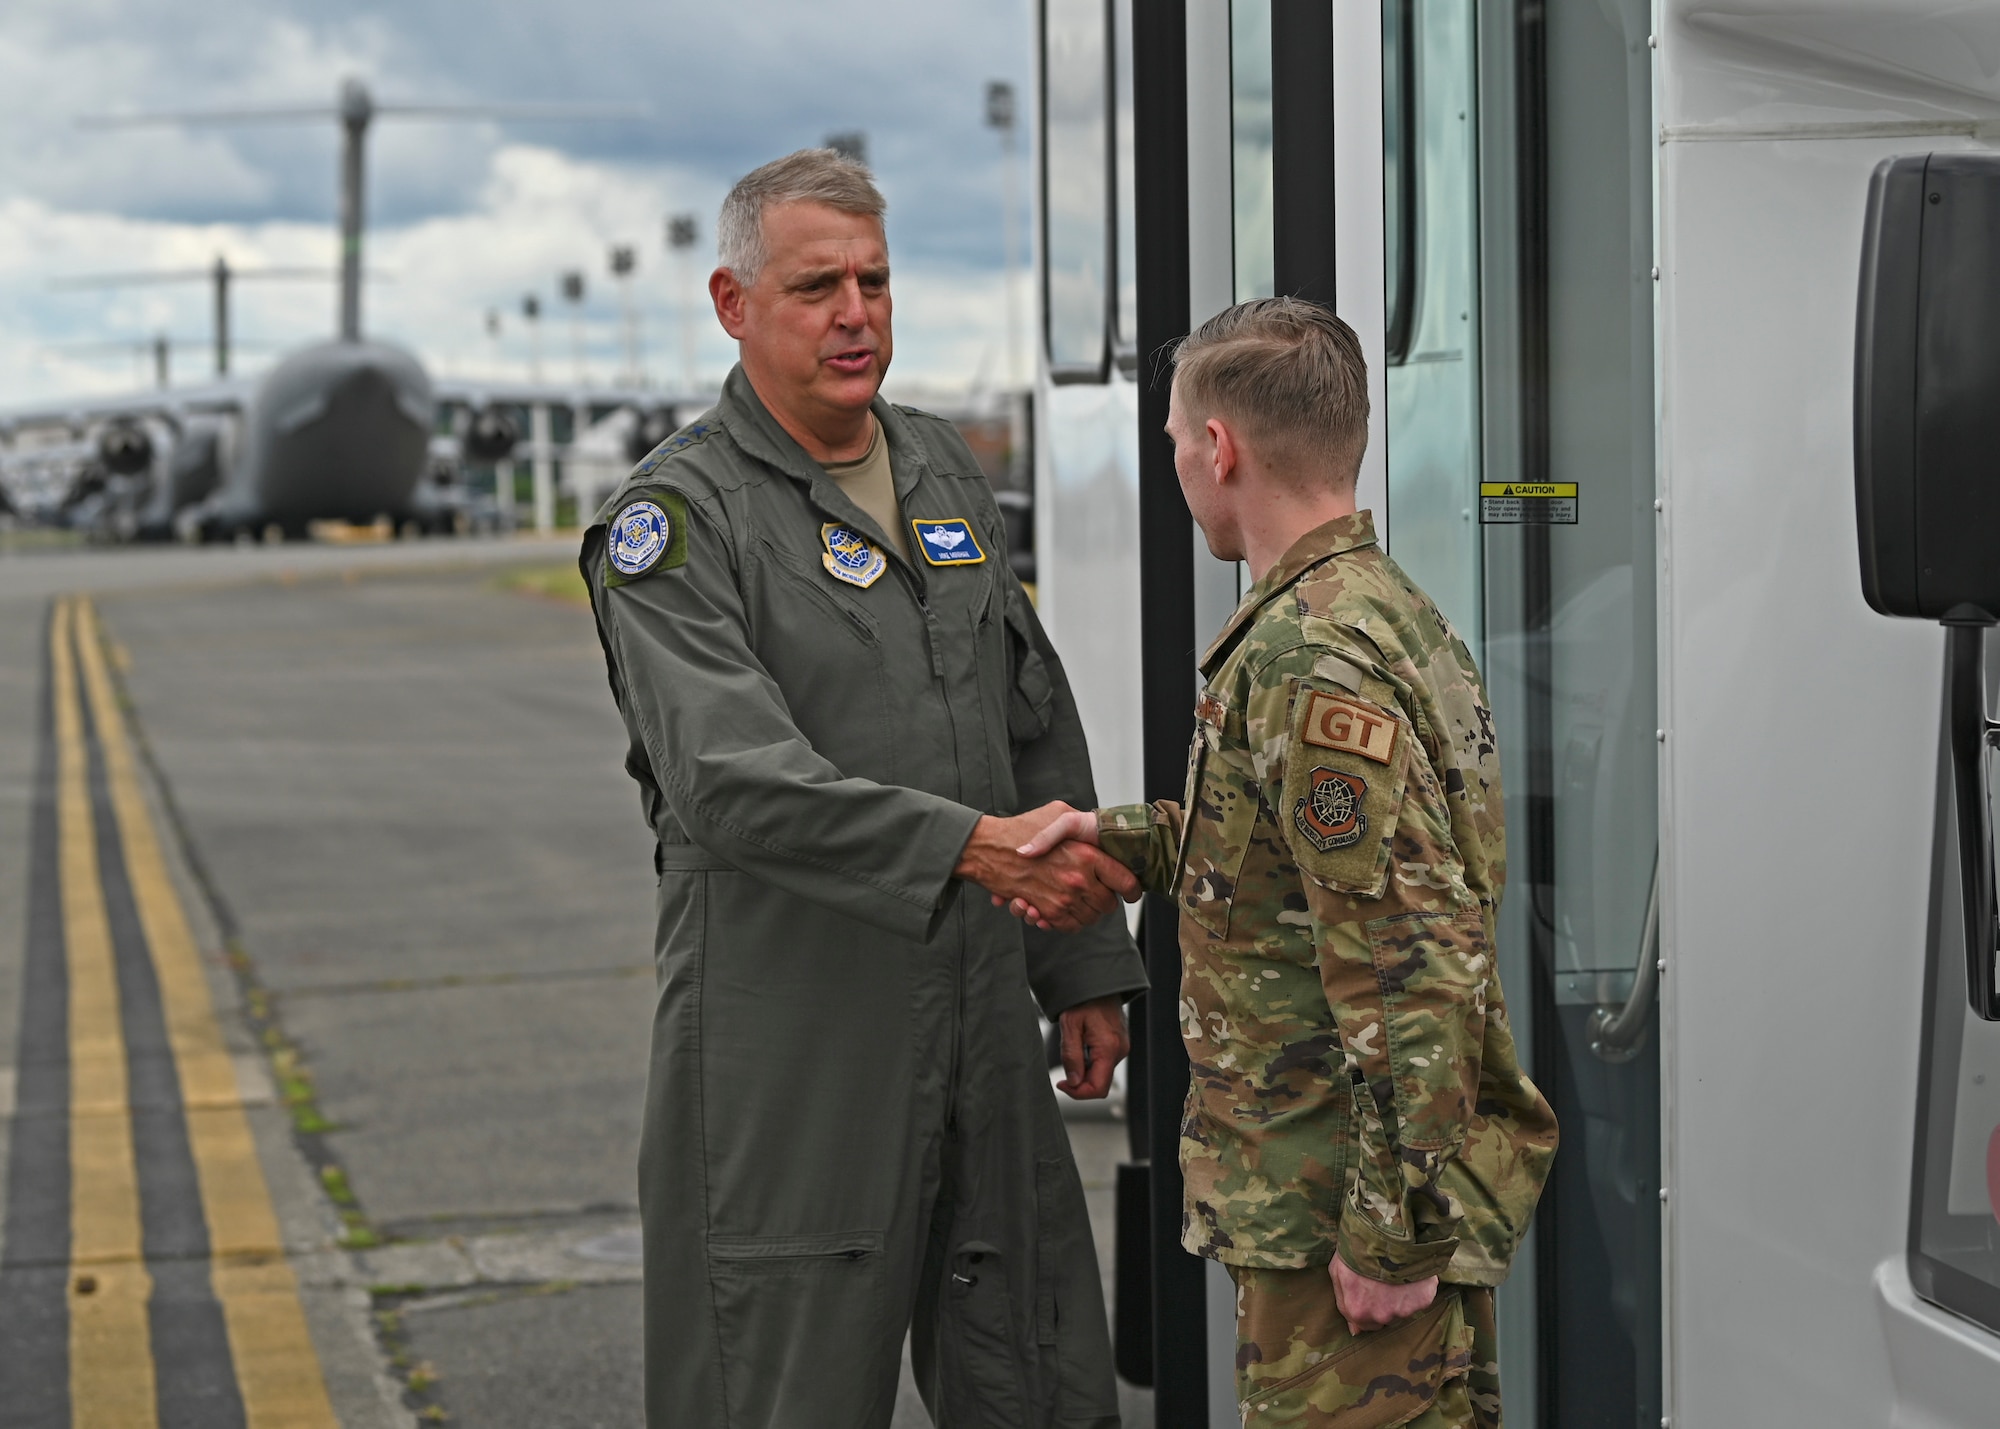 U.S. Air Force Gen. Mike Minihan, Air Mobility Command commander, left, coins Airman 1st Class Julian Culpepper, a ground transportation operator with the 627th Logistics Readiness Squadron, during his visit to Joint Base Lewis-McChord, Washington, July 7, 2022. Minihan and Chief Master Sgt. Brian Kruzelnick, AMC command chief, spent two days visiting Team McChord and recognized several of the wing’s outstanding performers during their time. (U.S. Air Force photo by Senior Airman Callie Norton)